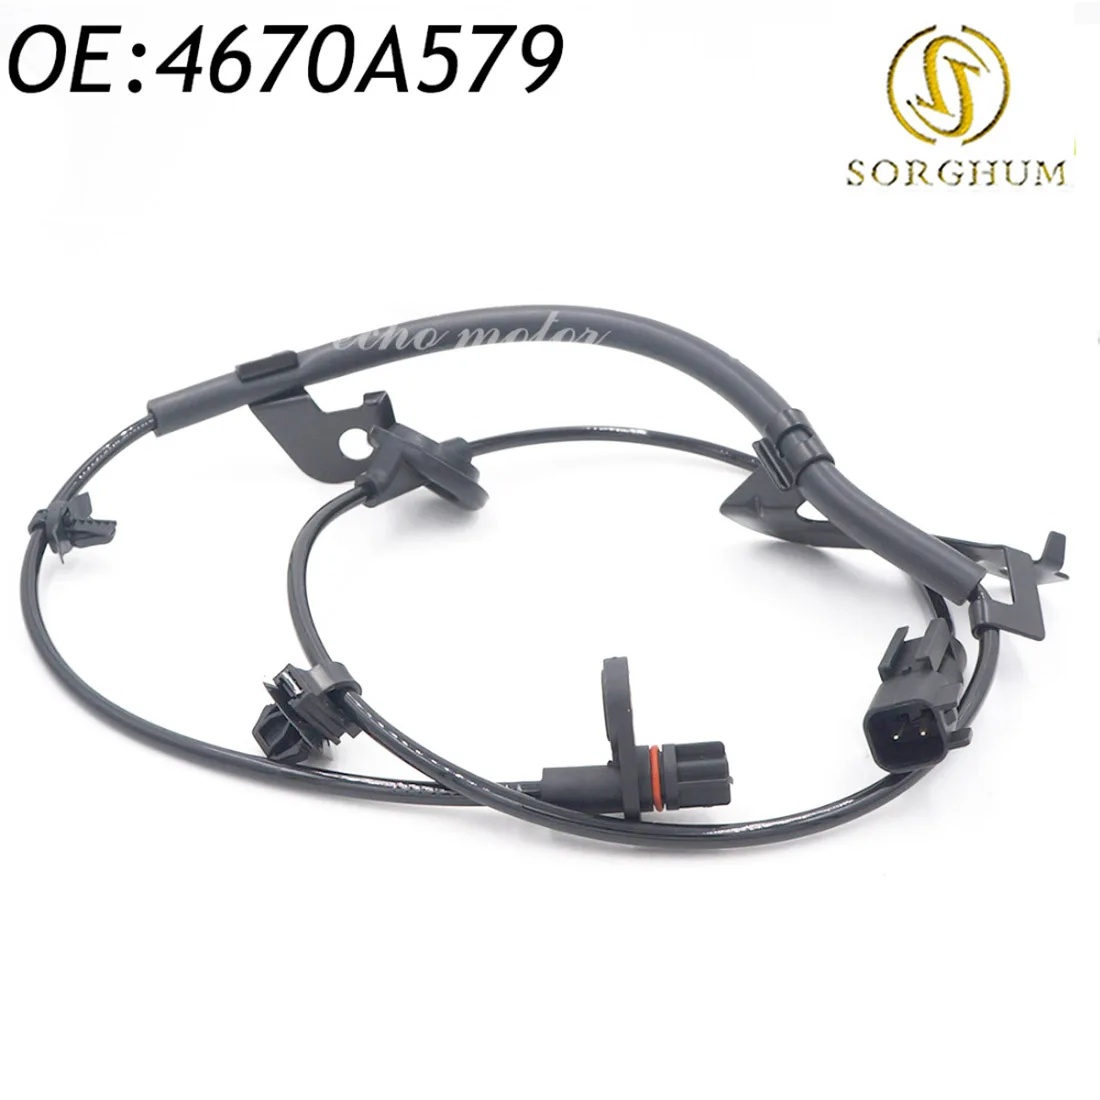 

New Rear Left ABS Wheel Speed Sensor for Mitsubishi Lancer 2WD Outlander ASX 07-12 4670A579 5S11132 , MN116243, SU12585